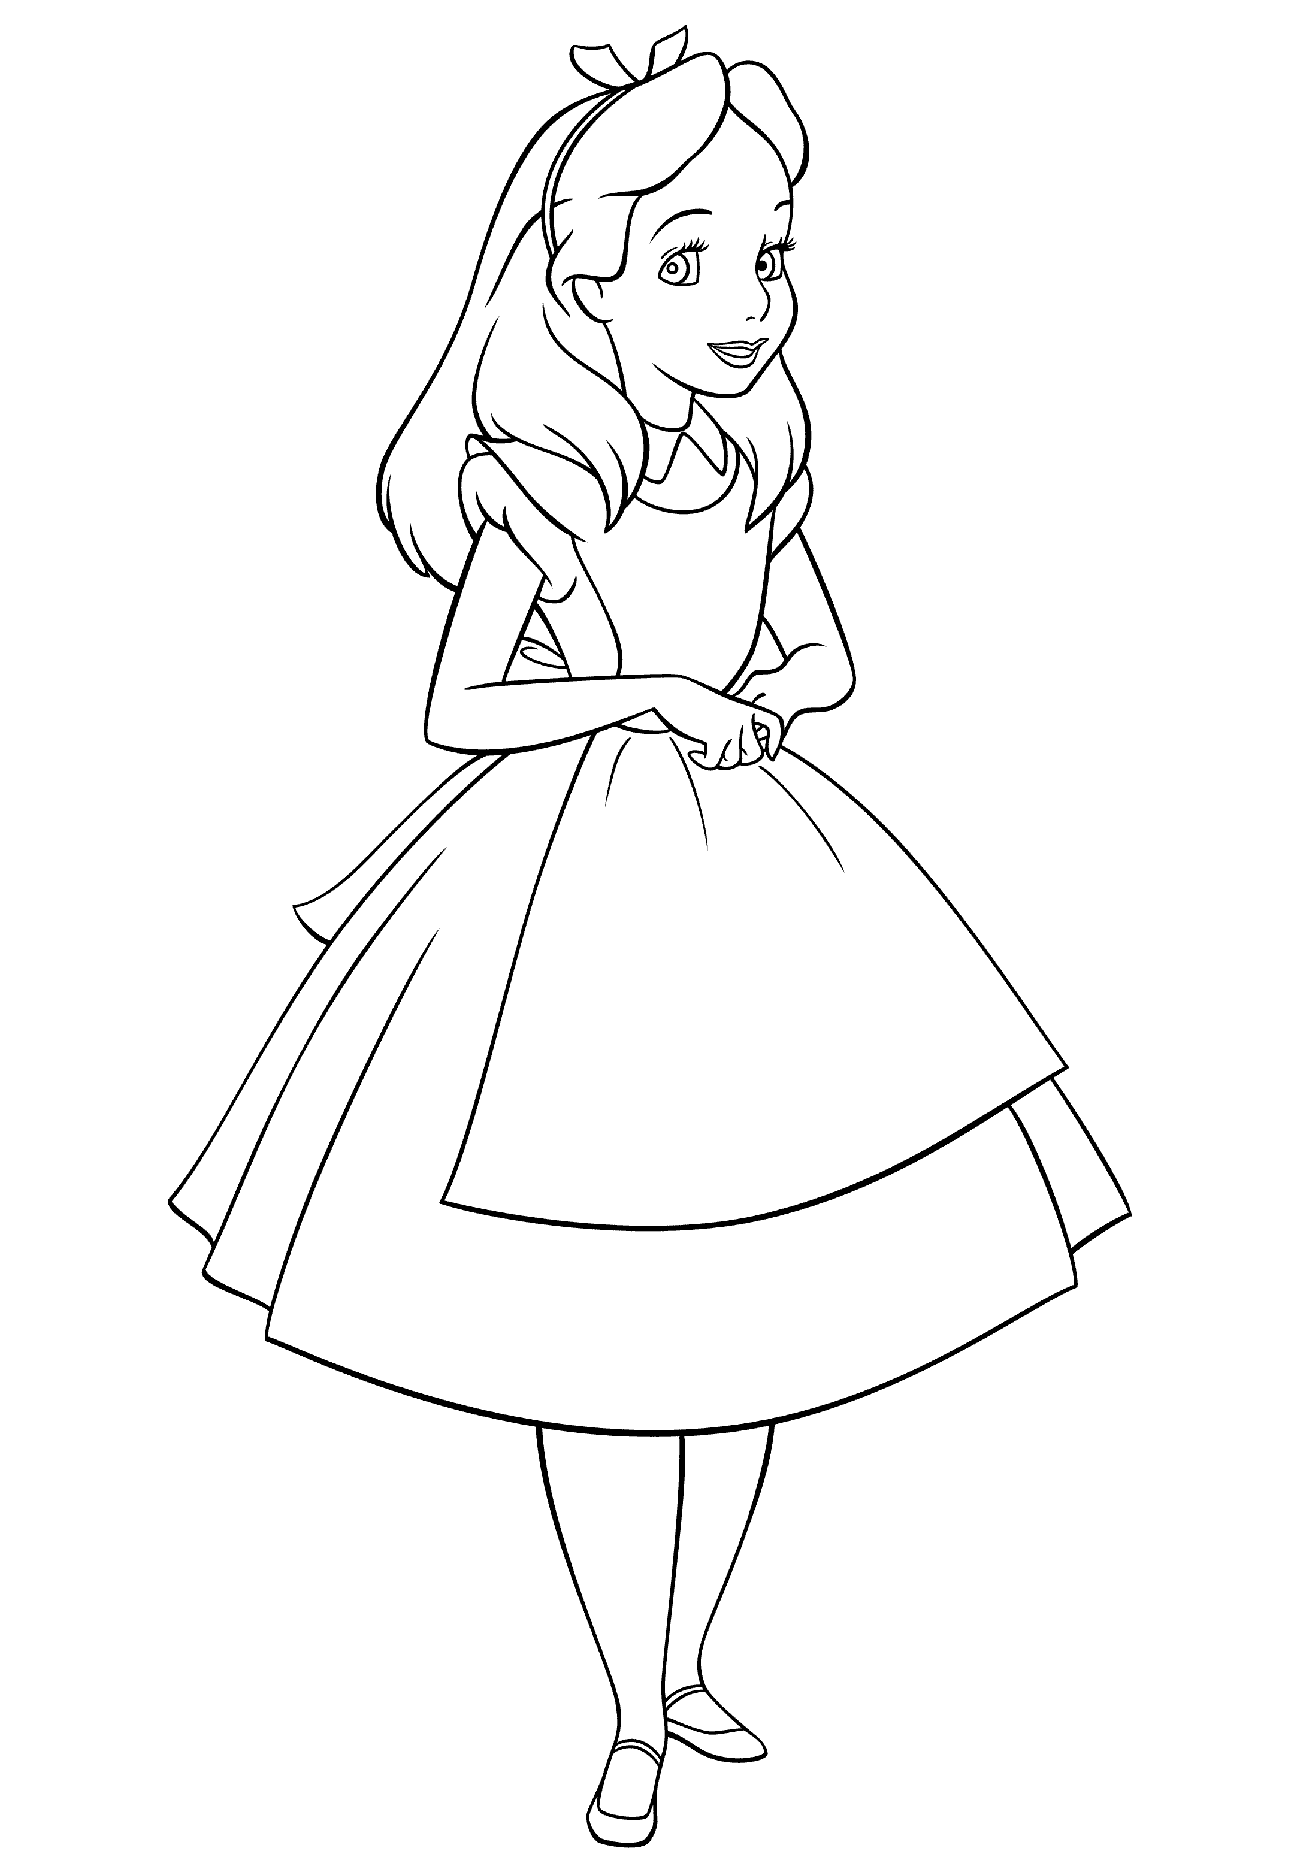 Coloring page - Girl Alice